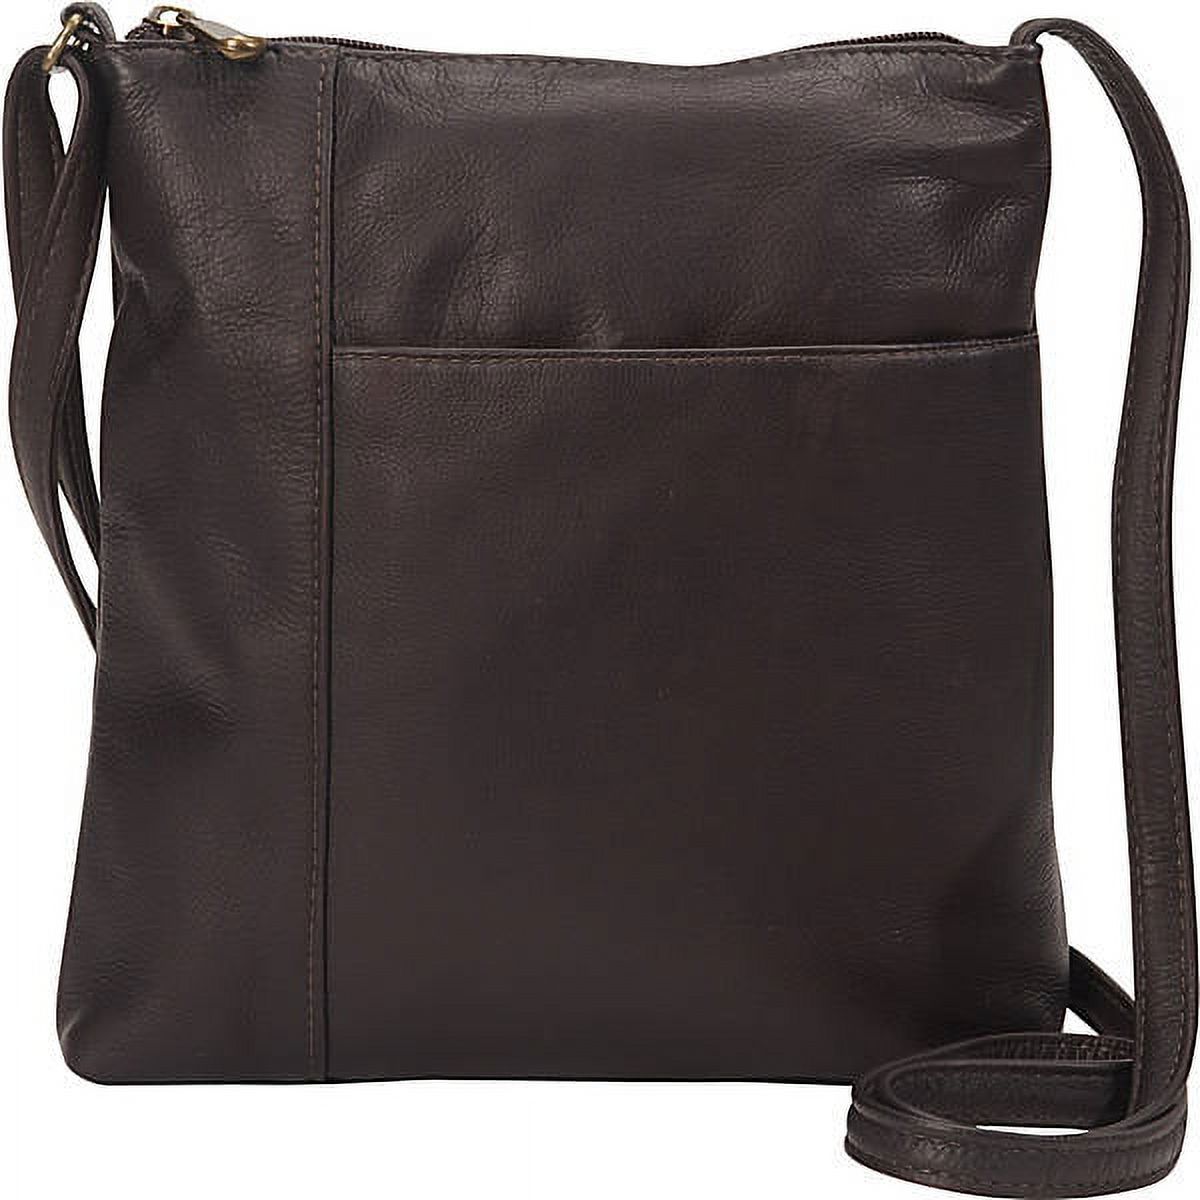 Le Donne Leather Runaway Crossbody LD-8050 - image 1 of 4